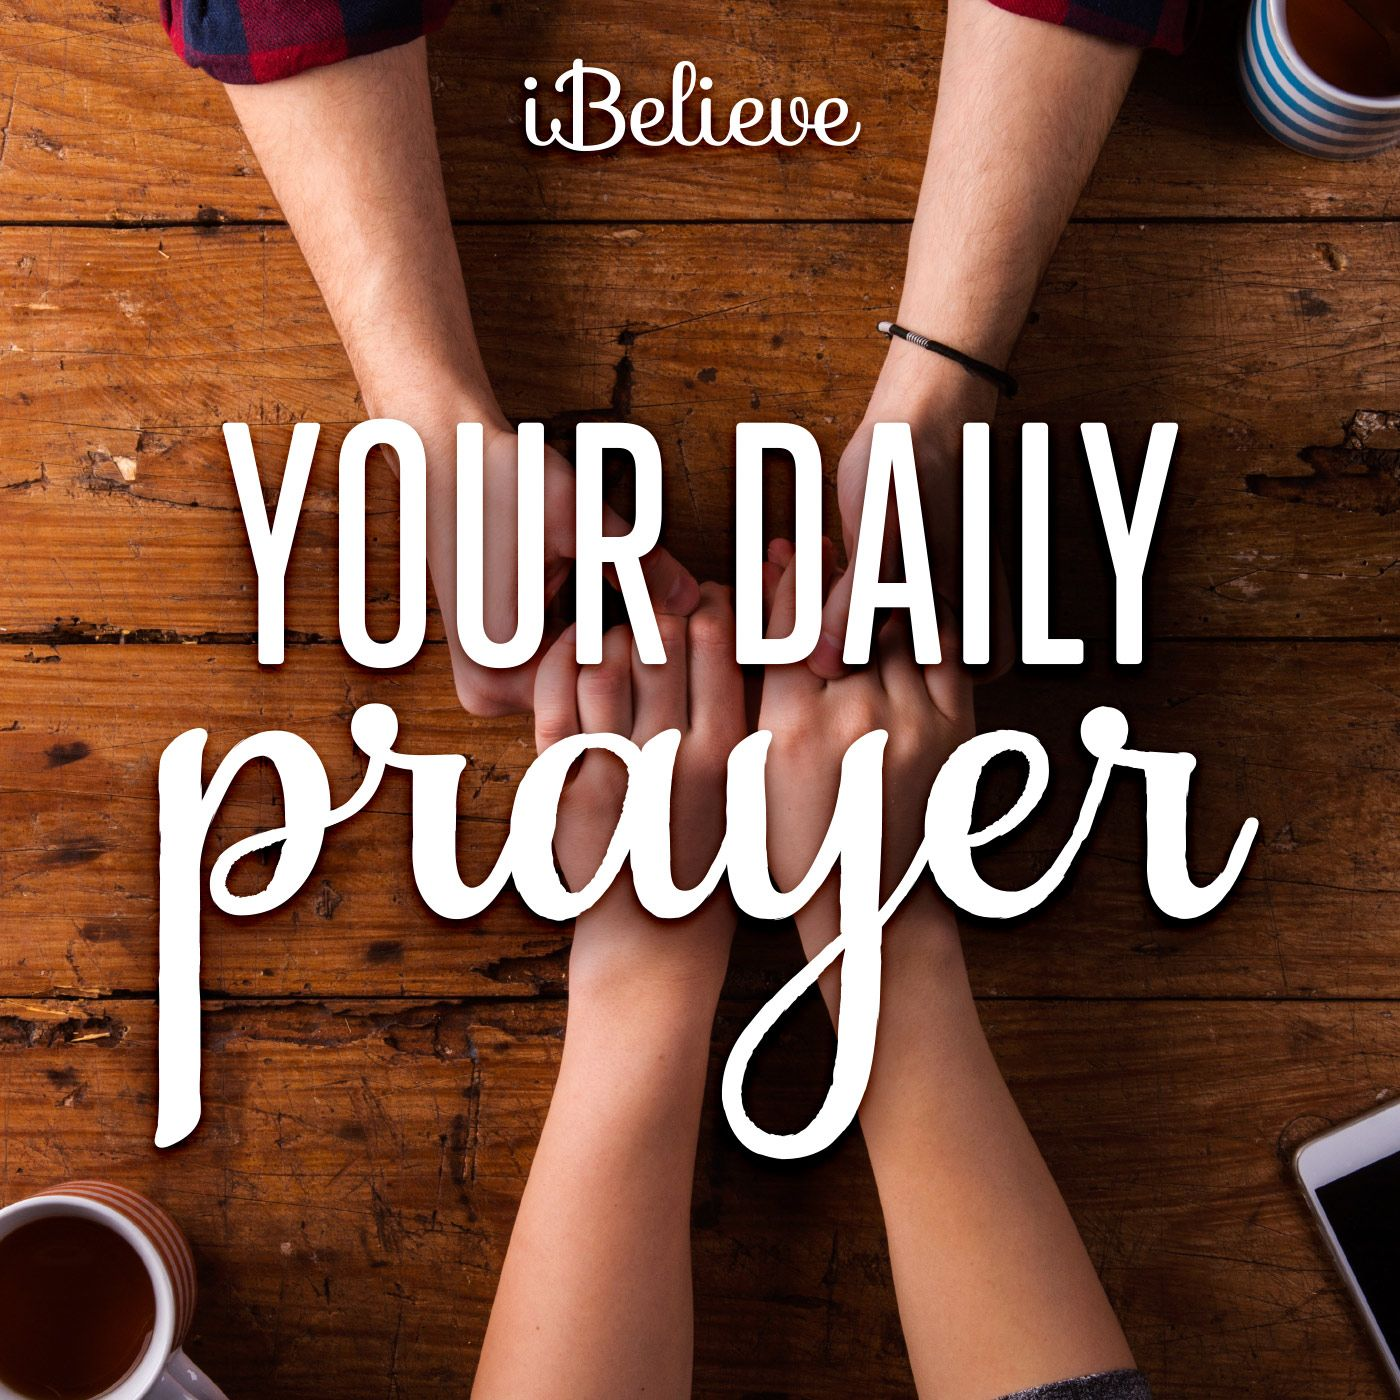 A Prayer For Personal Healing - Pray to Be Healed and Recover: An iBelieve.com Exclusive by Rebecca Barlow Jordan